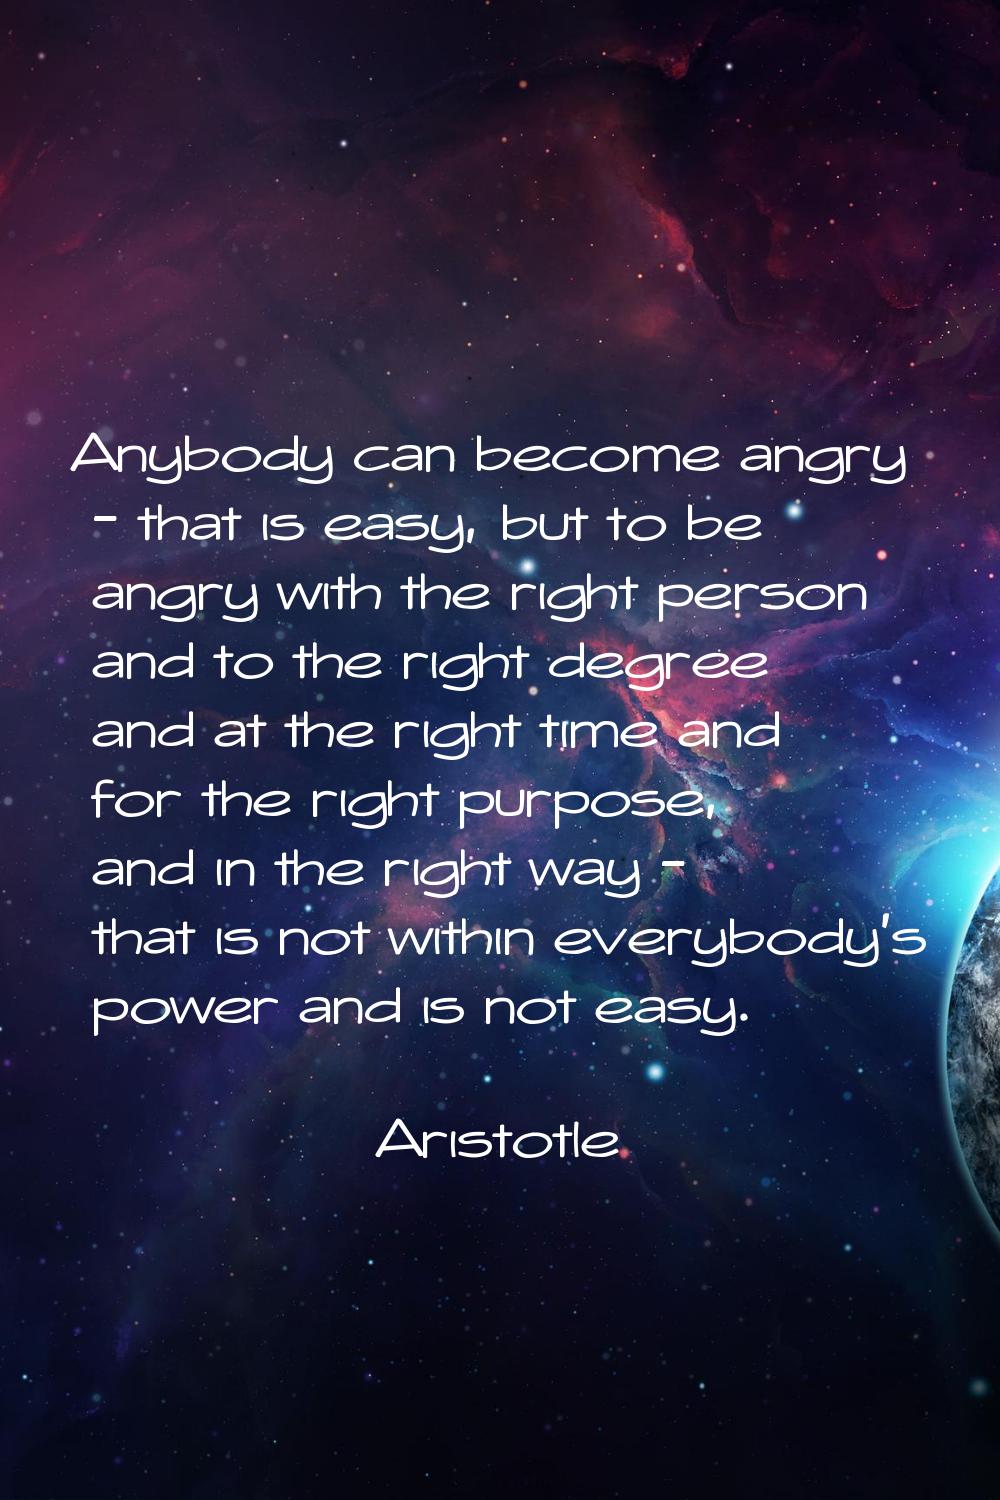 Anybody can become angry - that is easy, but to be angry with the right person and to the right deg